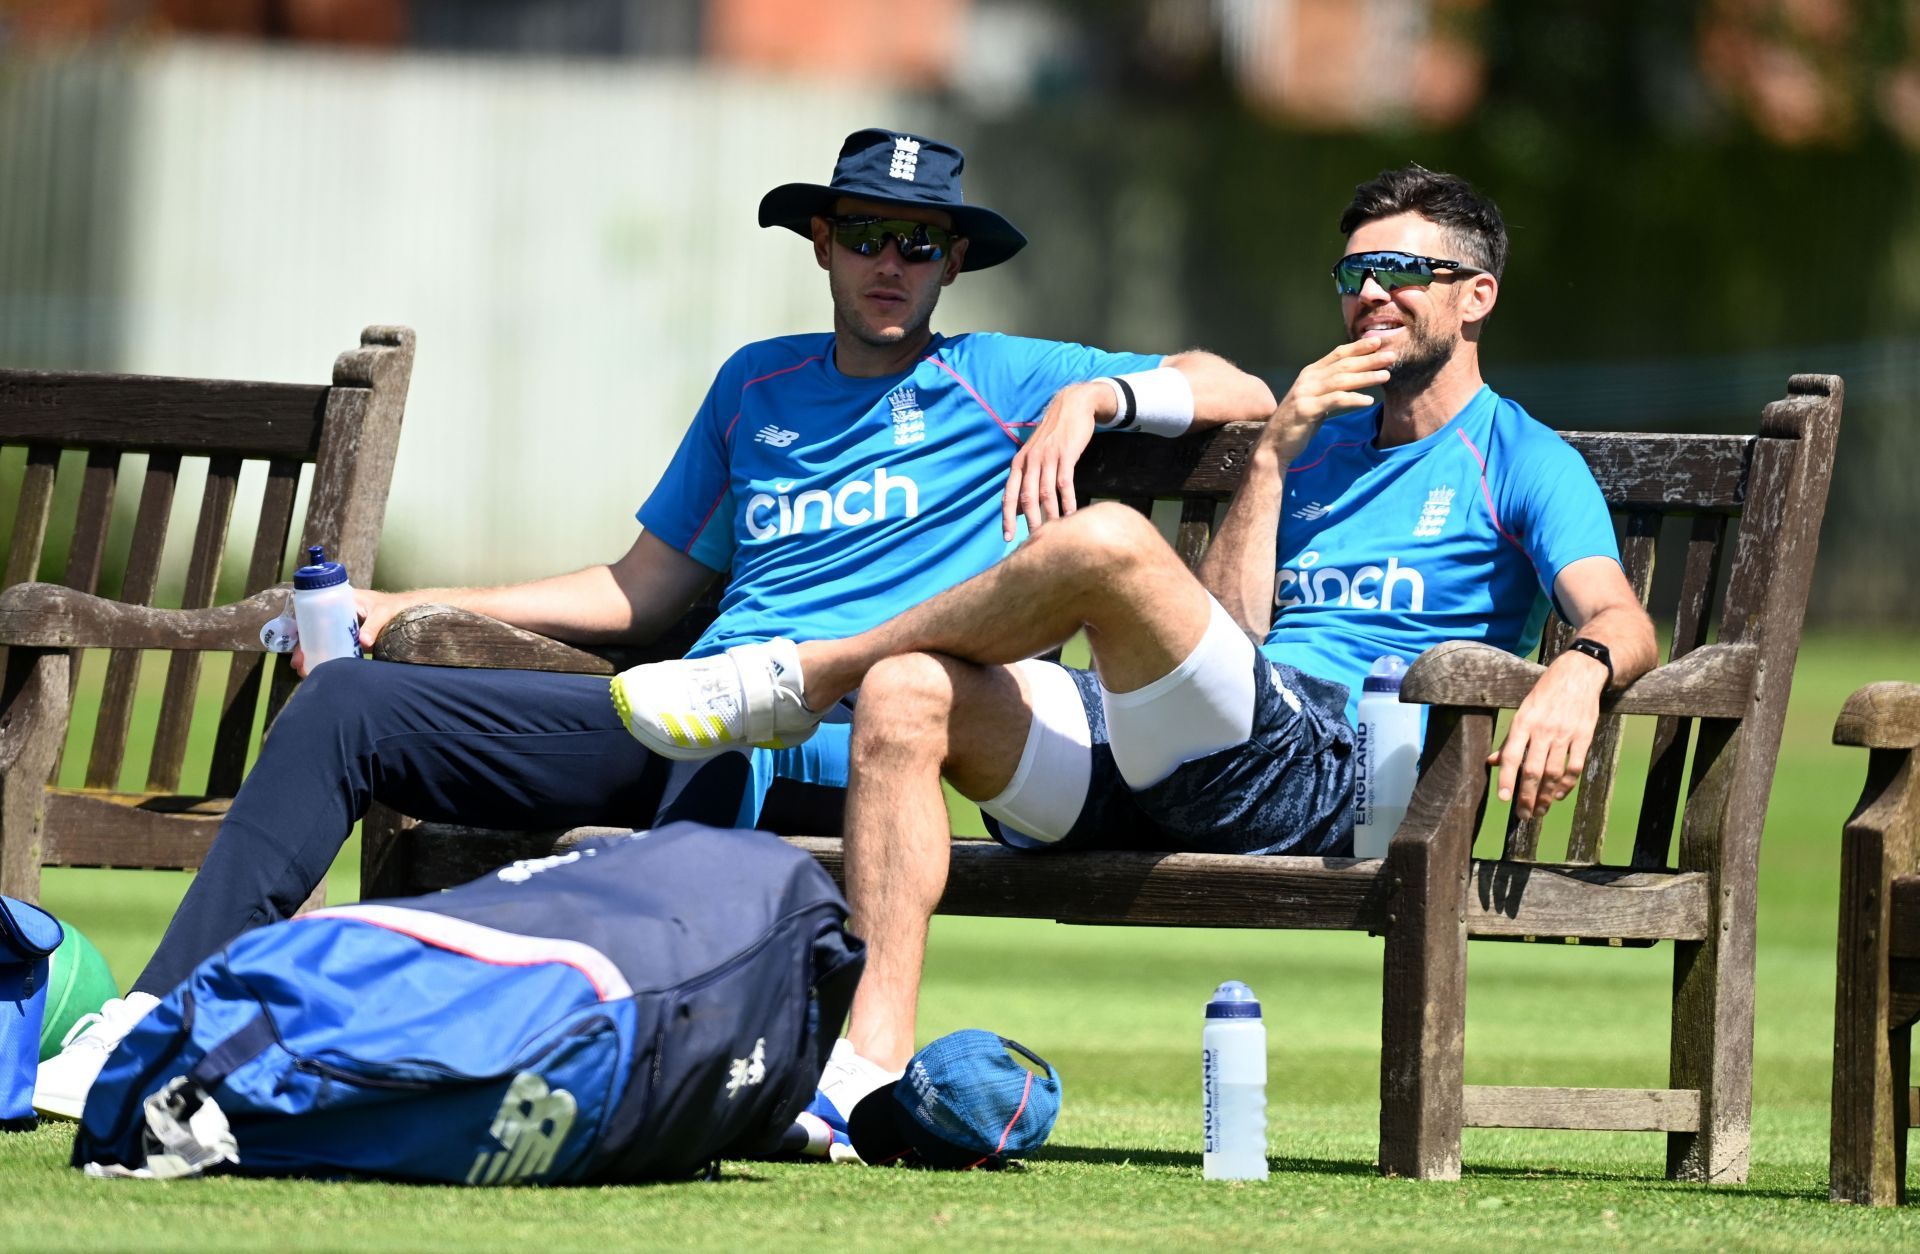 Stuart Broad and James Anderson. (Image Credits: Getty)